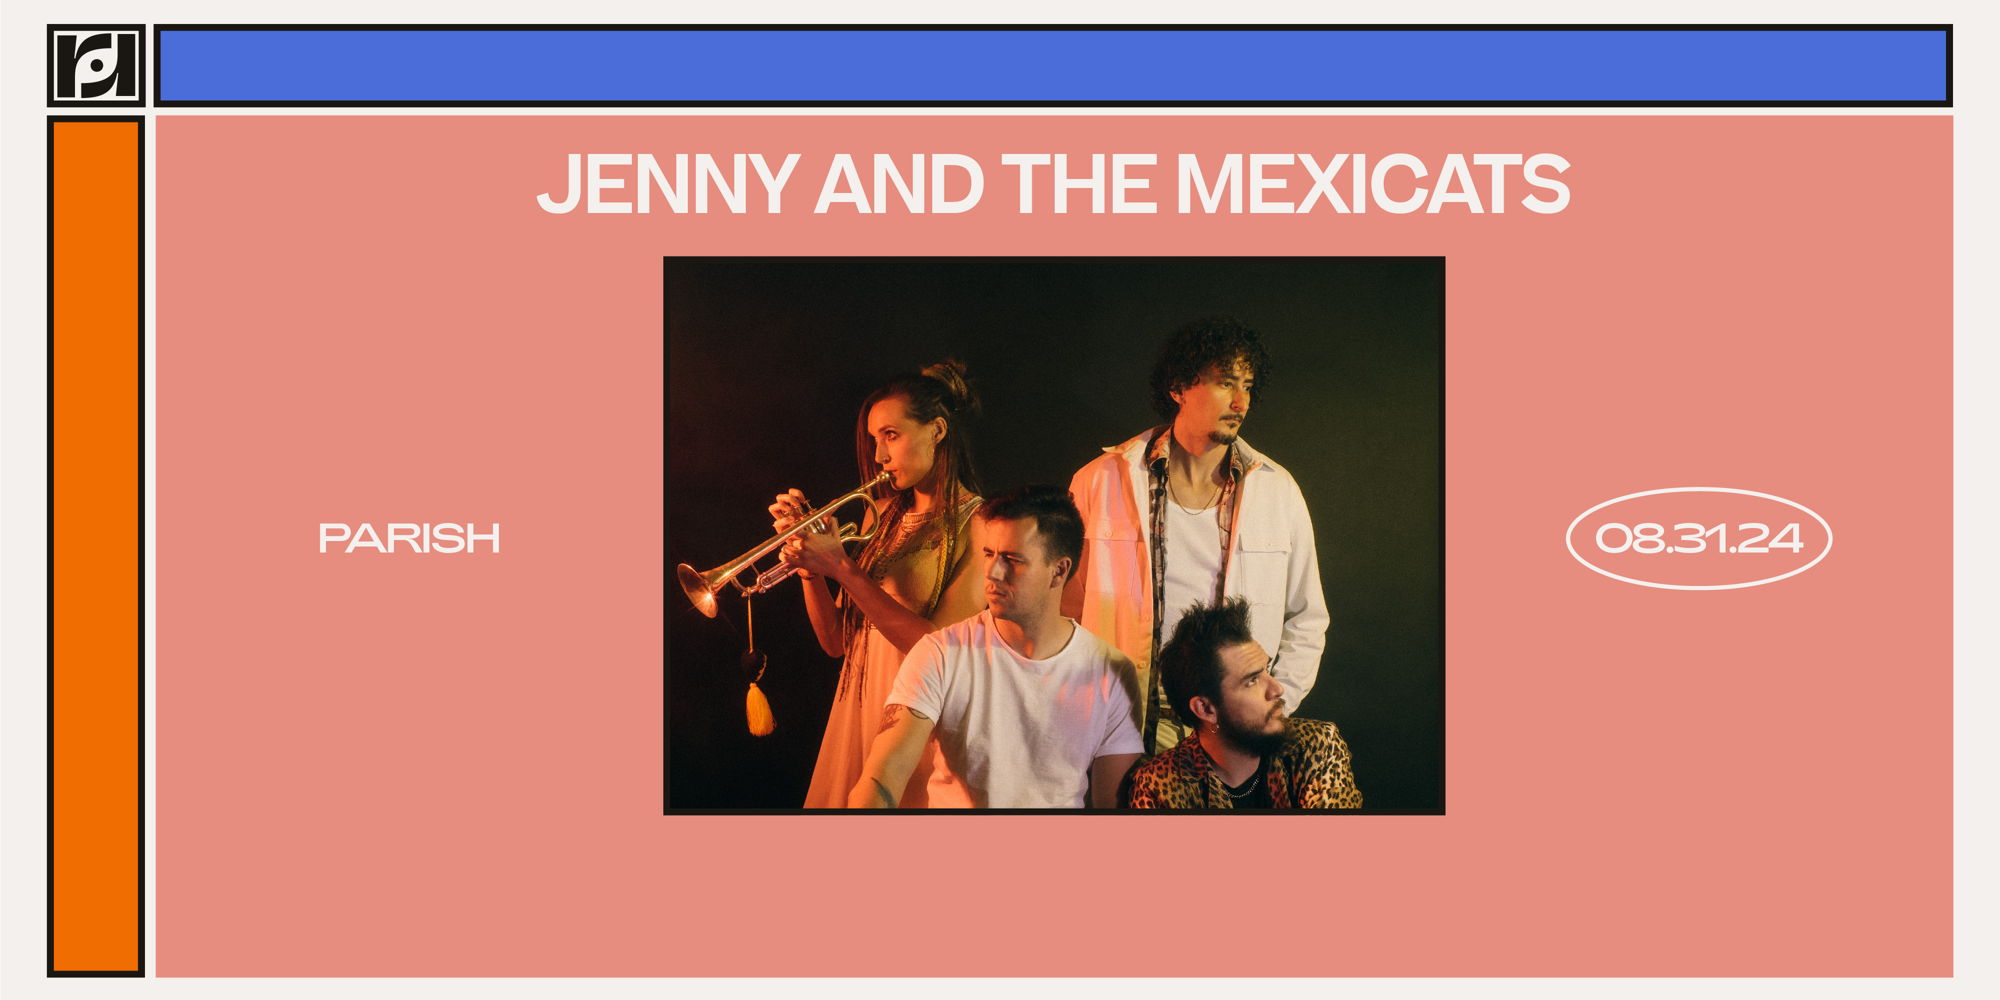 Resound Presents: Jenny and the Mexicats on 8/31 at Parish promotional image